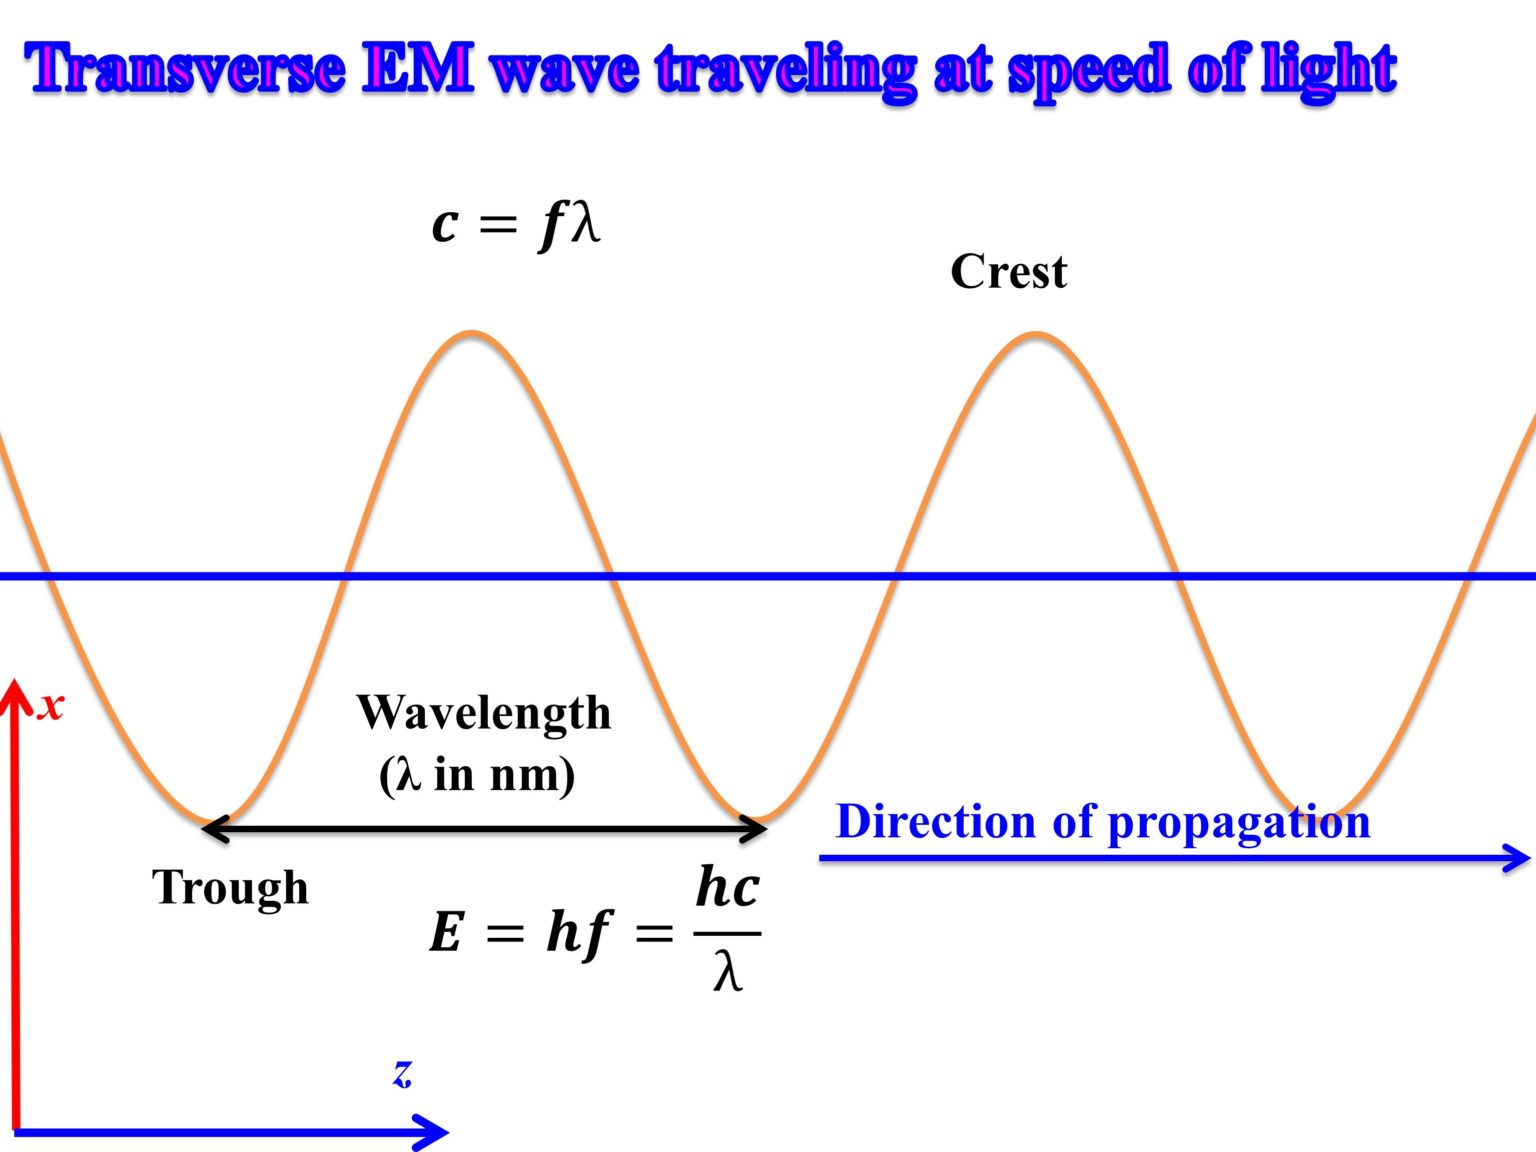 intensity of a light wave equation